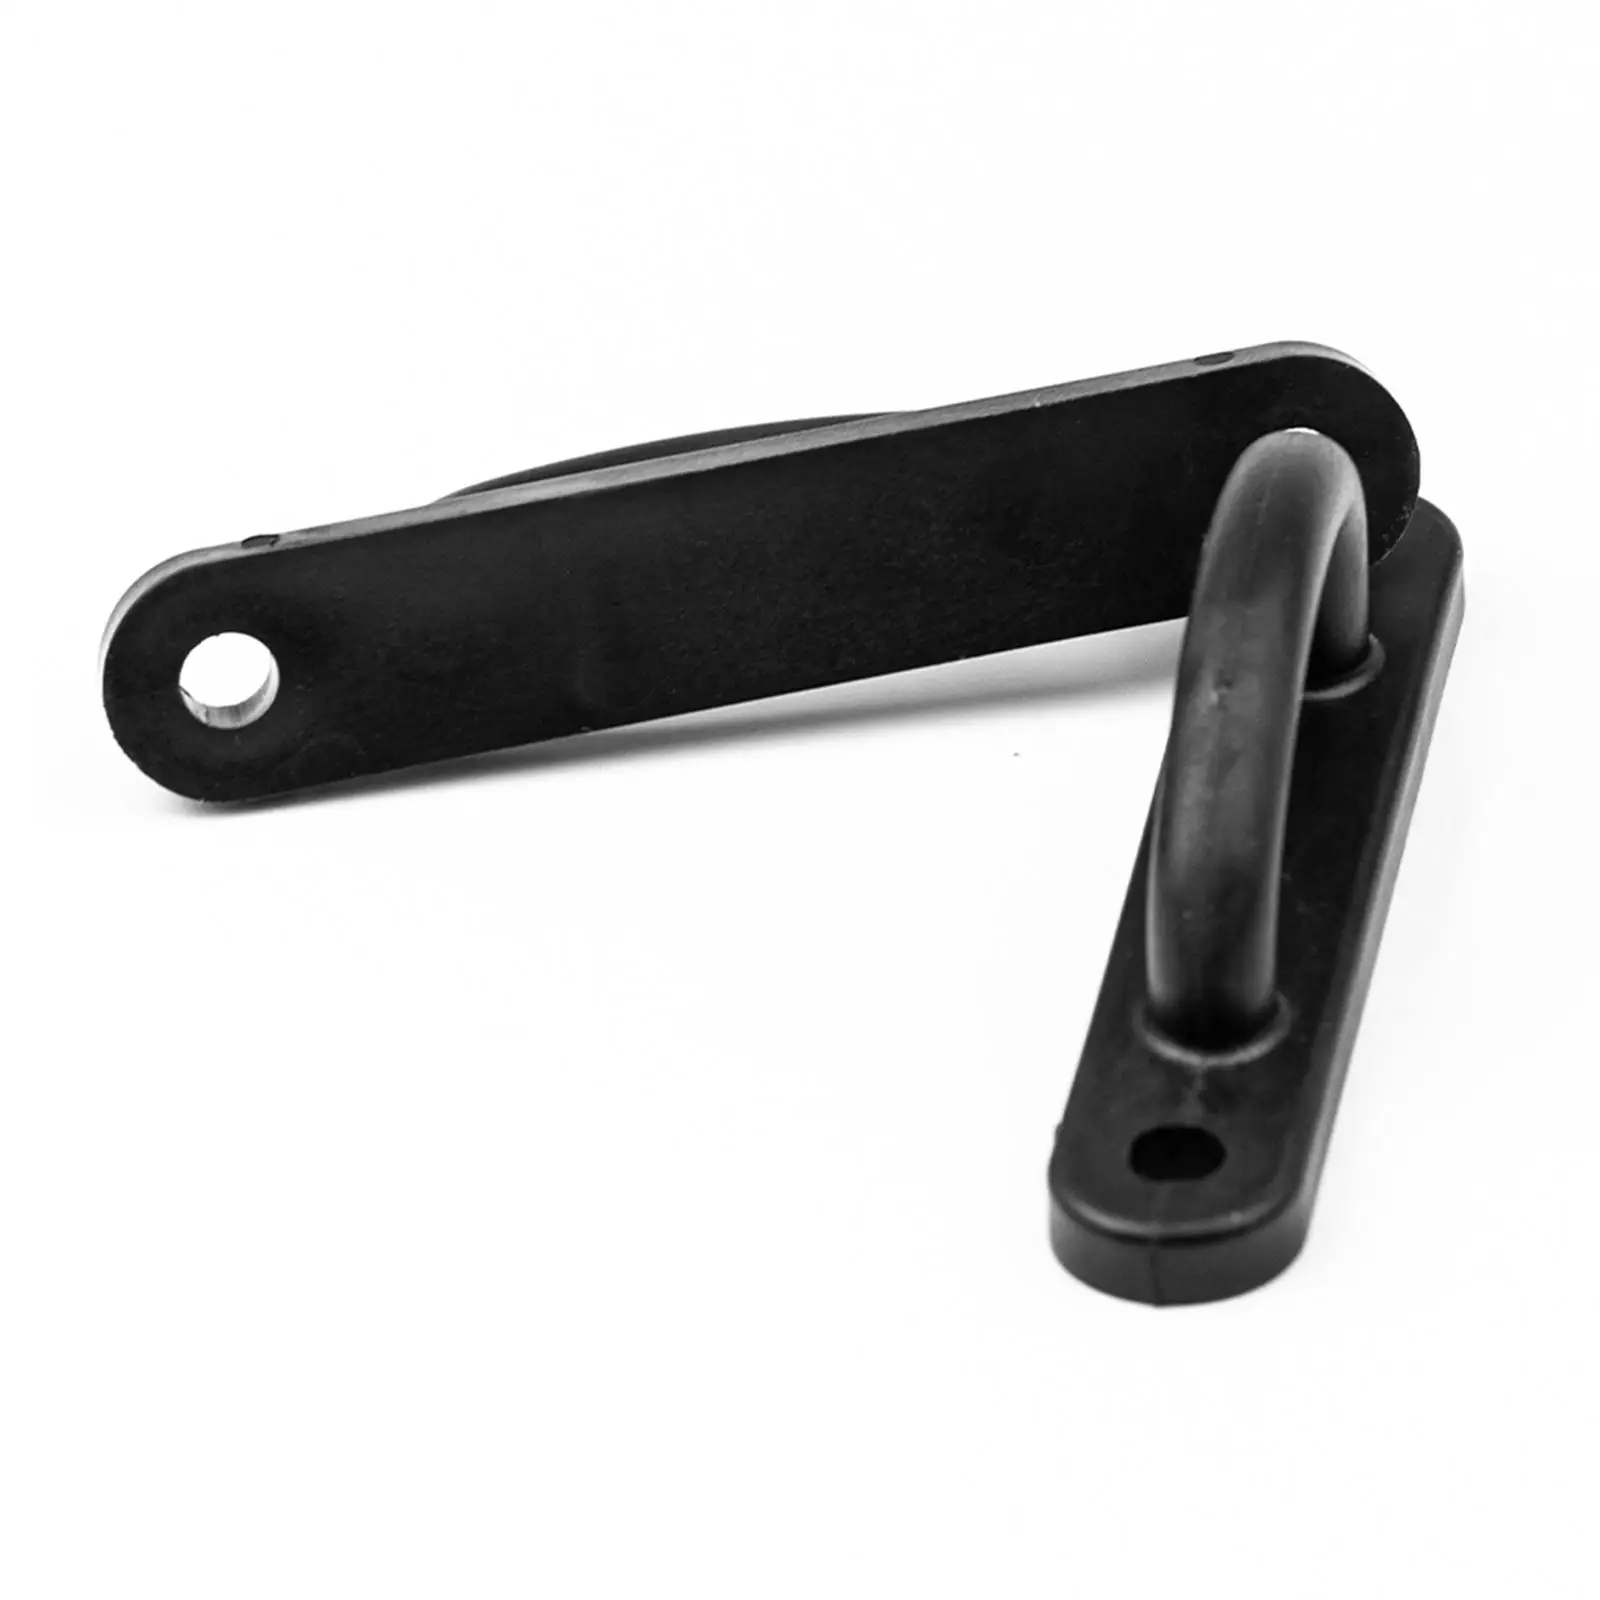 2x Truck Caps Rotary Latch D Striker Plates, Repair Parts, Spare Parts ,Durable, Black 5423020000 for Glass Doors